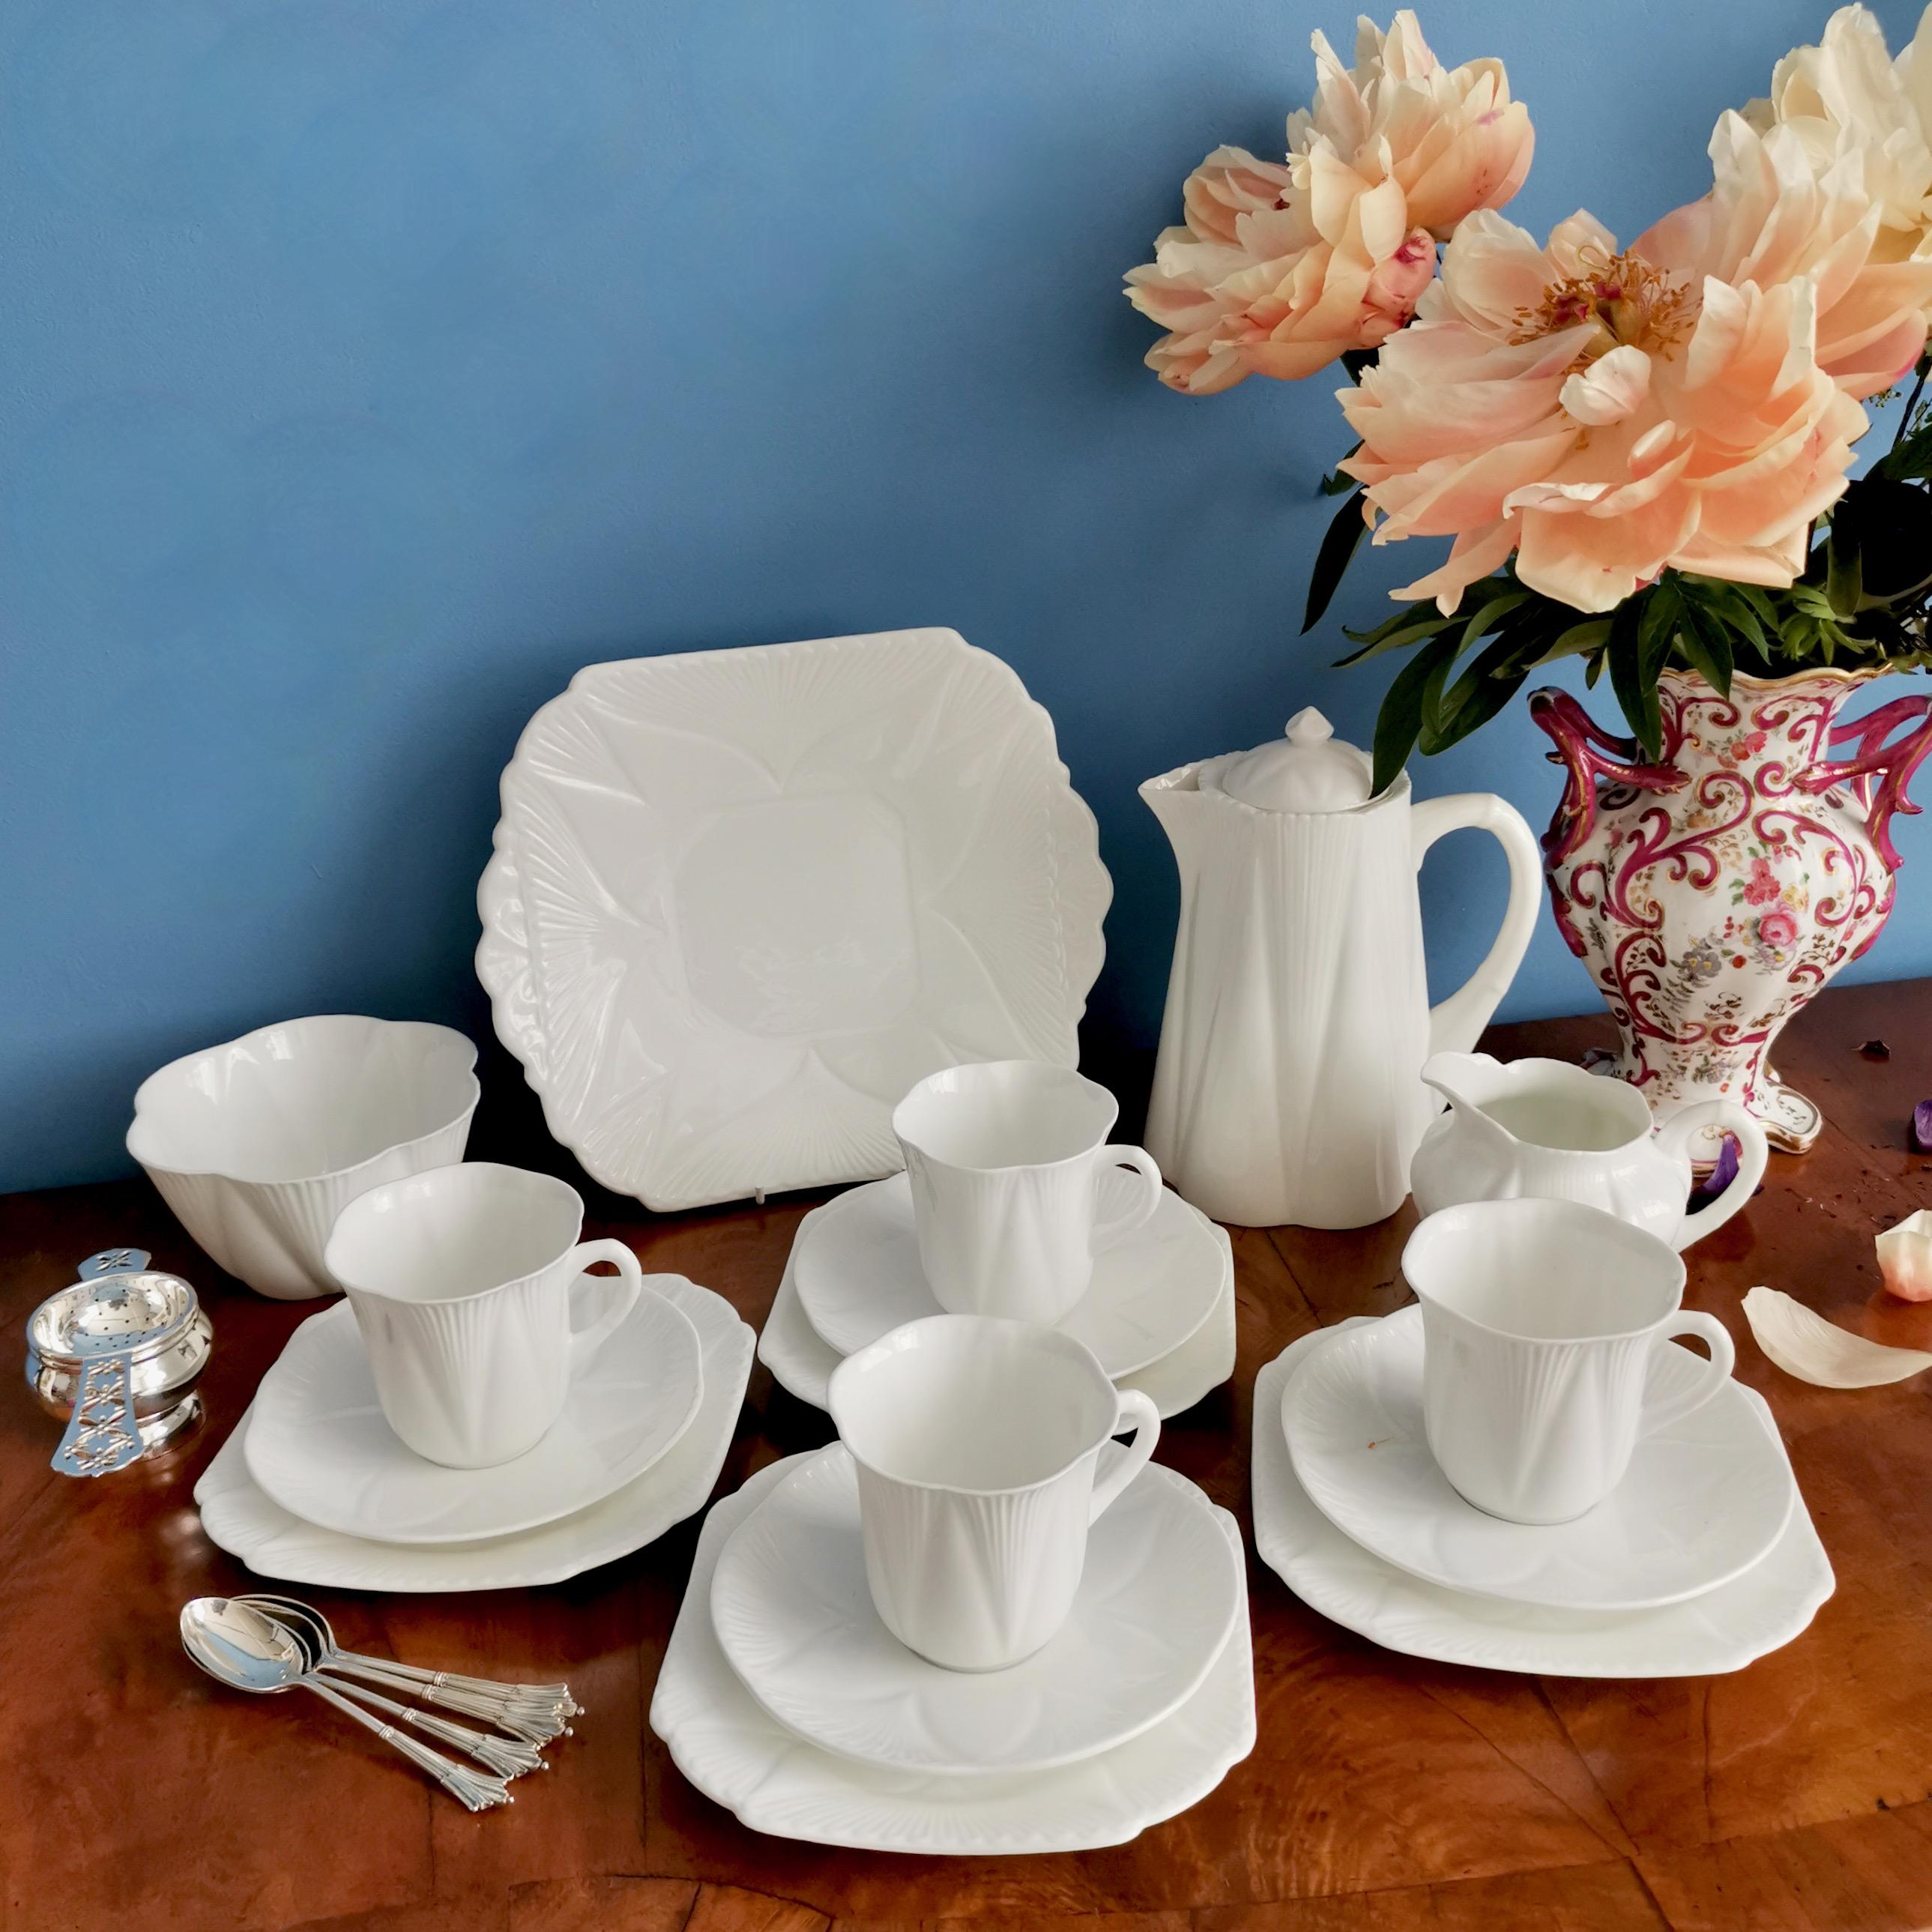 This is a charming coffee service for four in the 